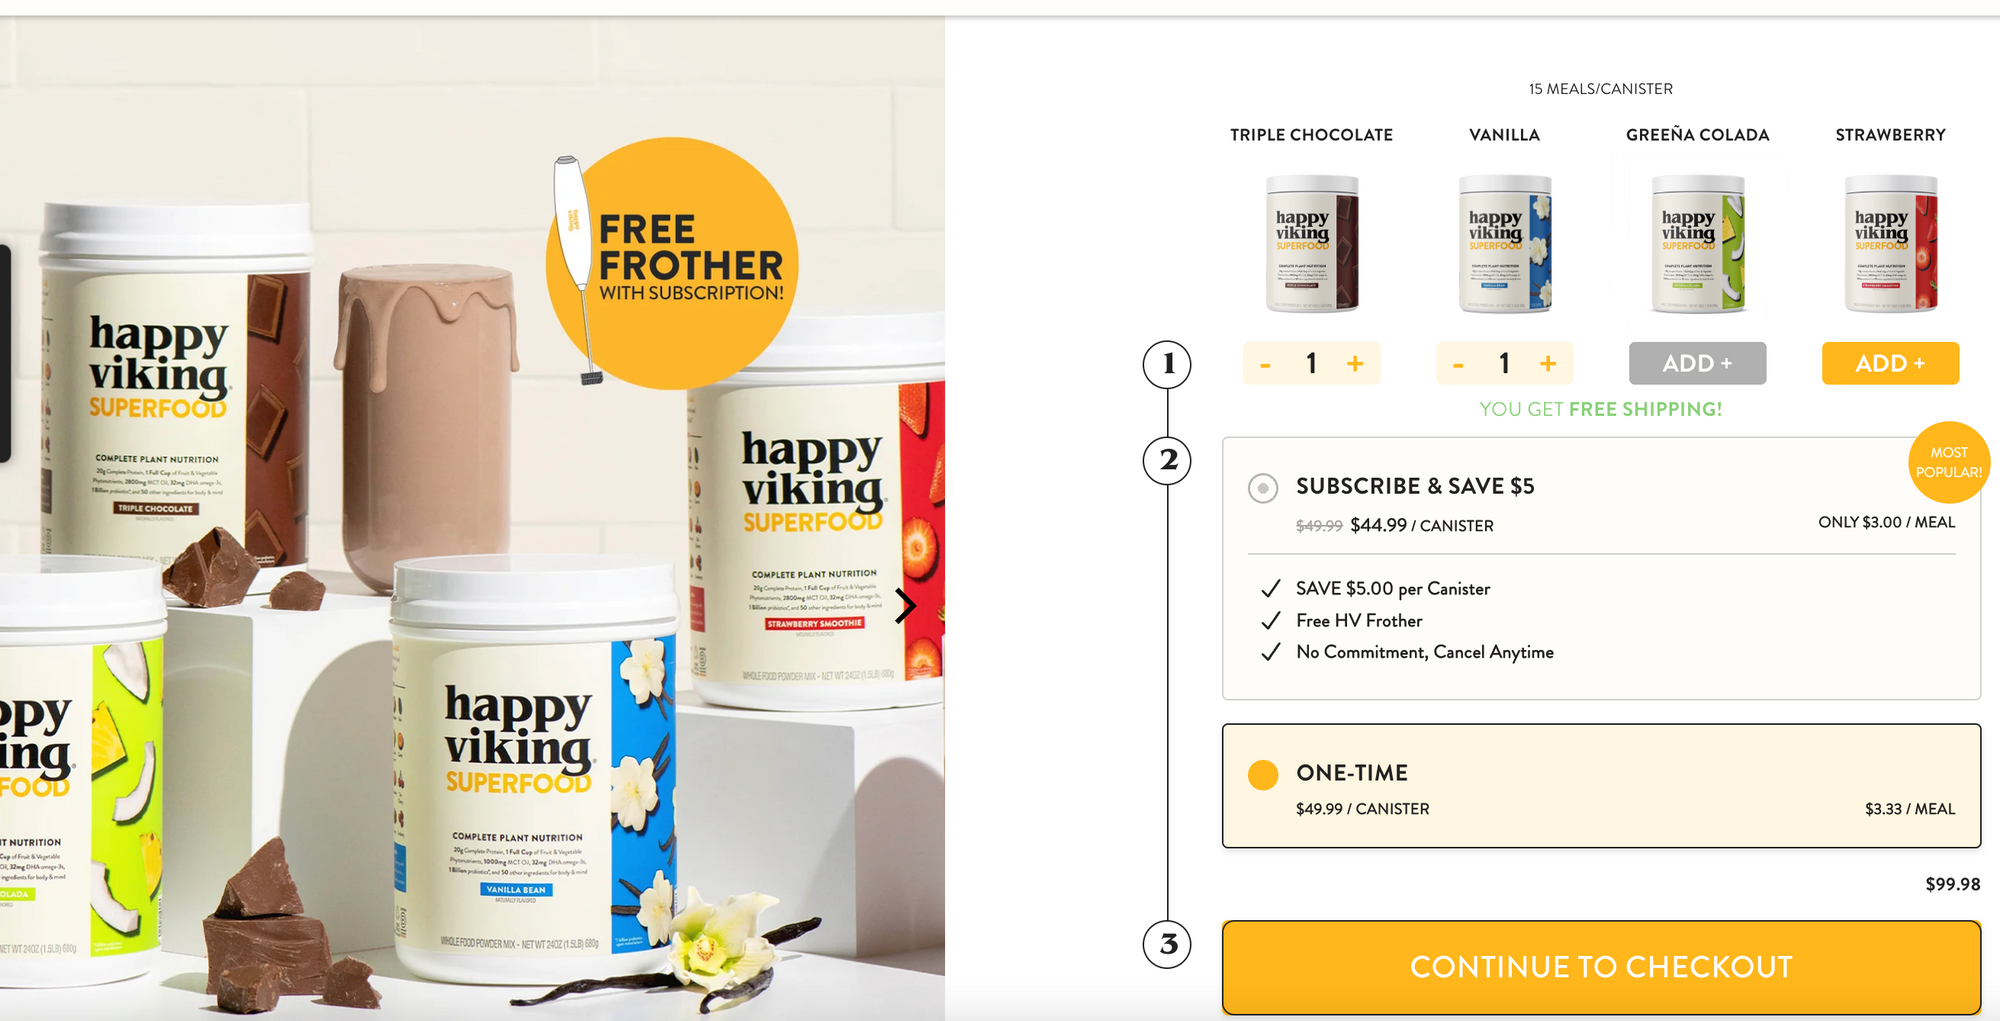 See how the plant-based protein shake, Happy Viking, eliminates the cart page altogether.